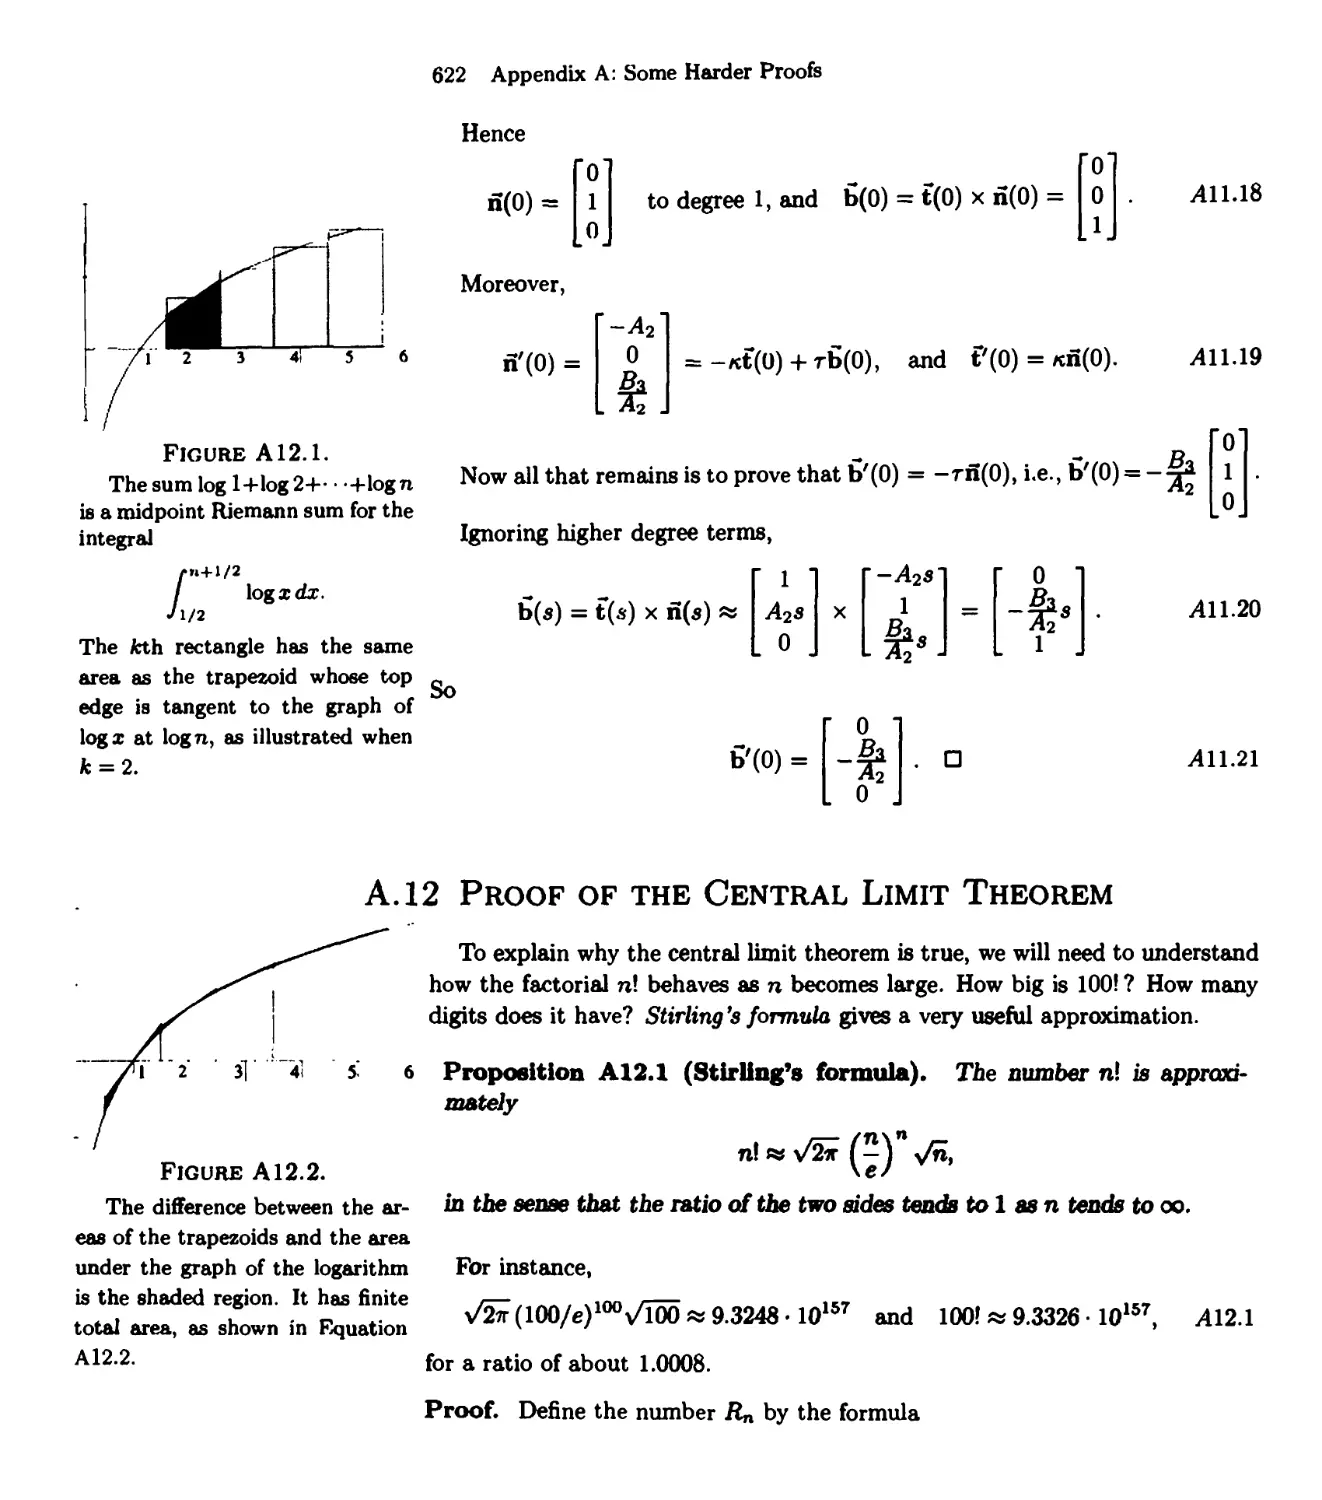 A.12 Proof of the Central Limit Theorem